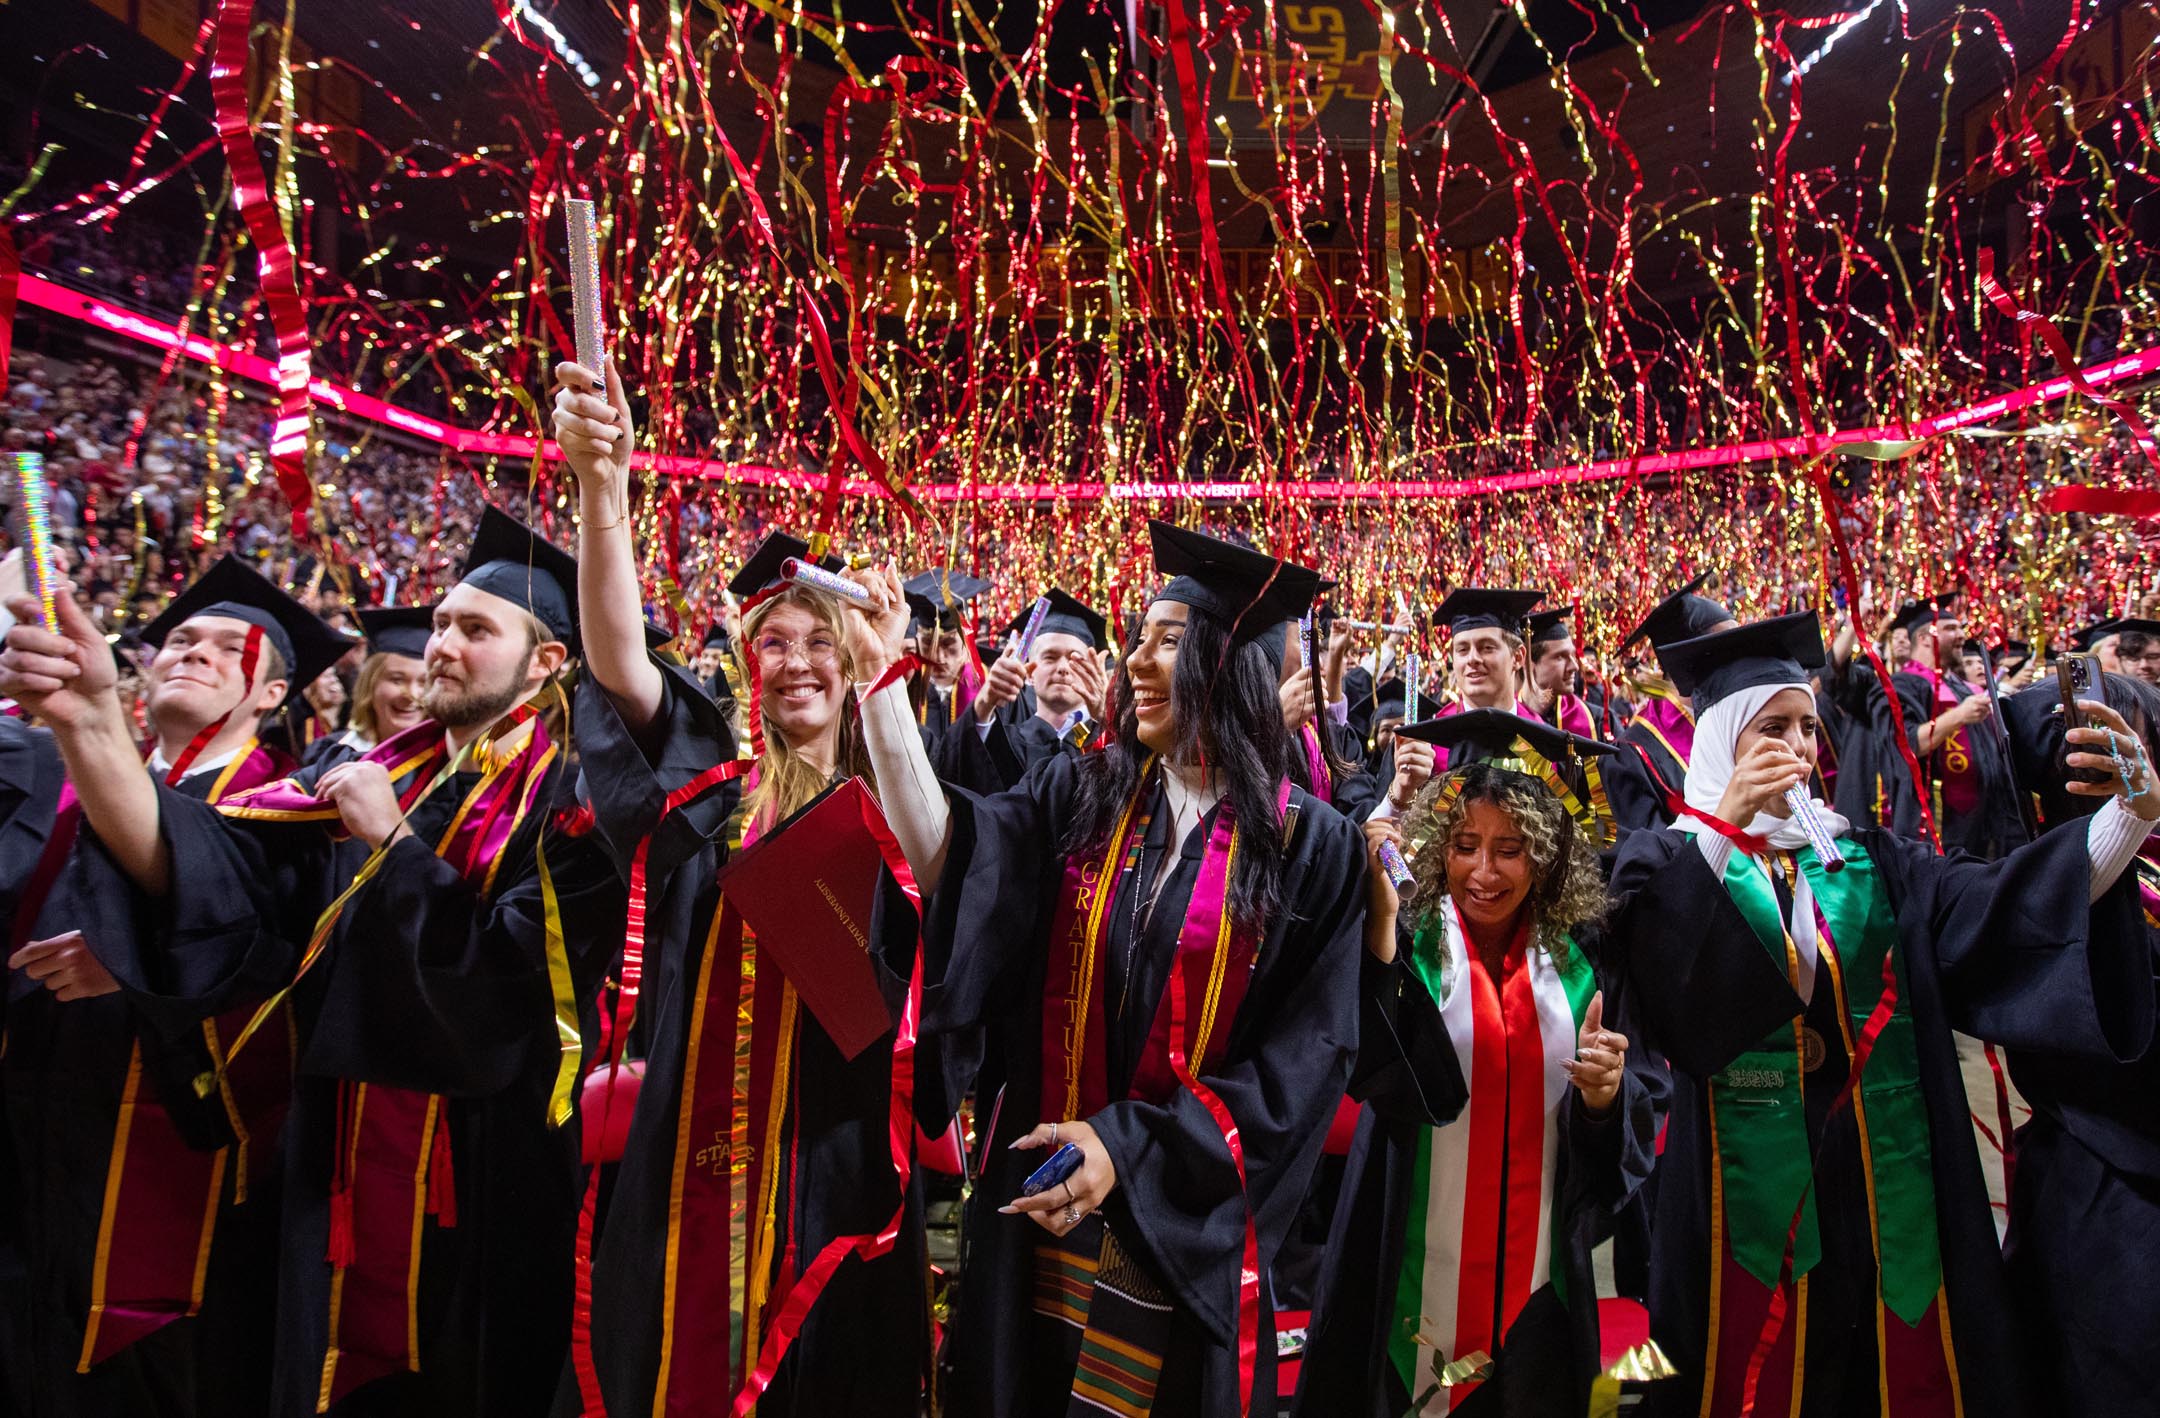 Graduates celebrate at the end of the commencement ceremony as streamers fall from above.